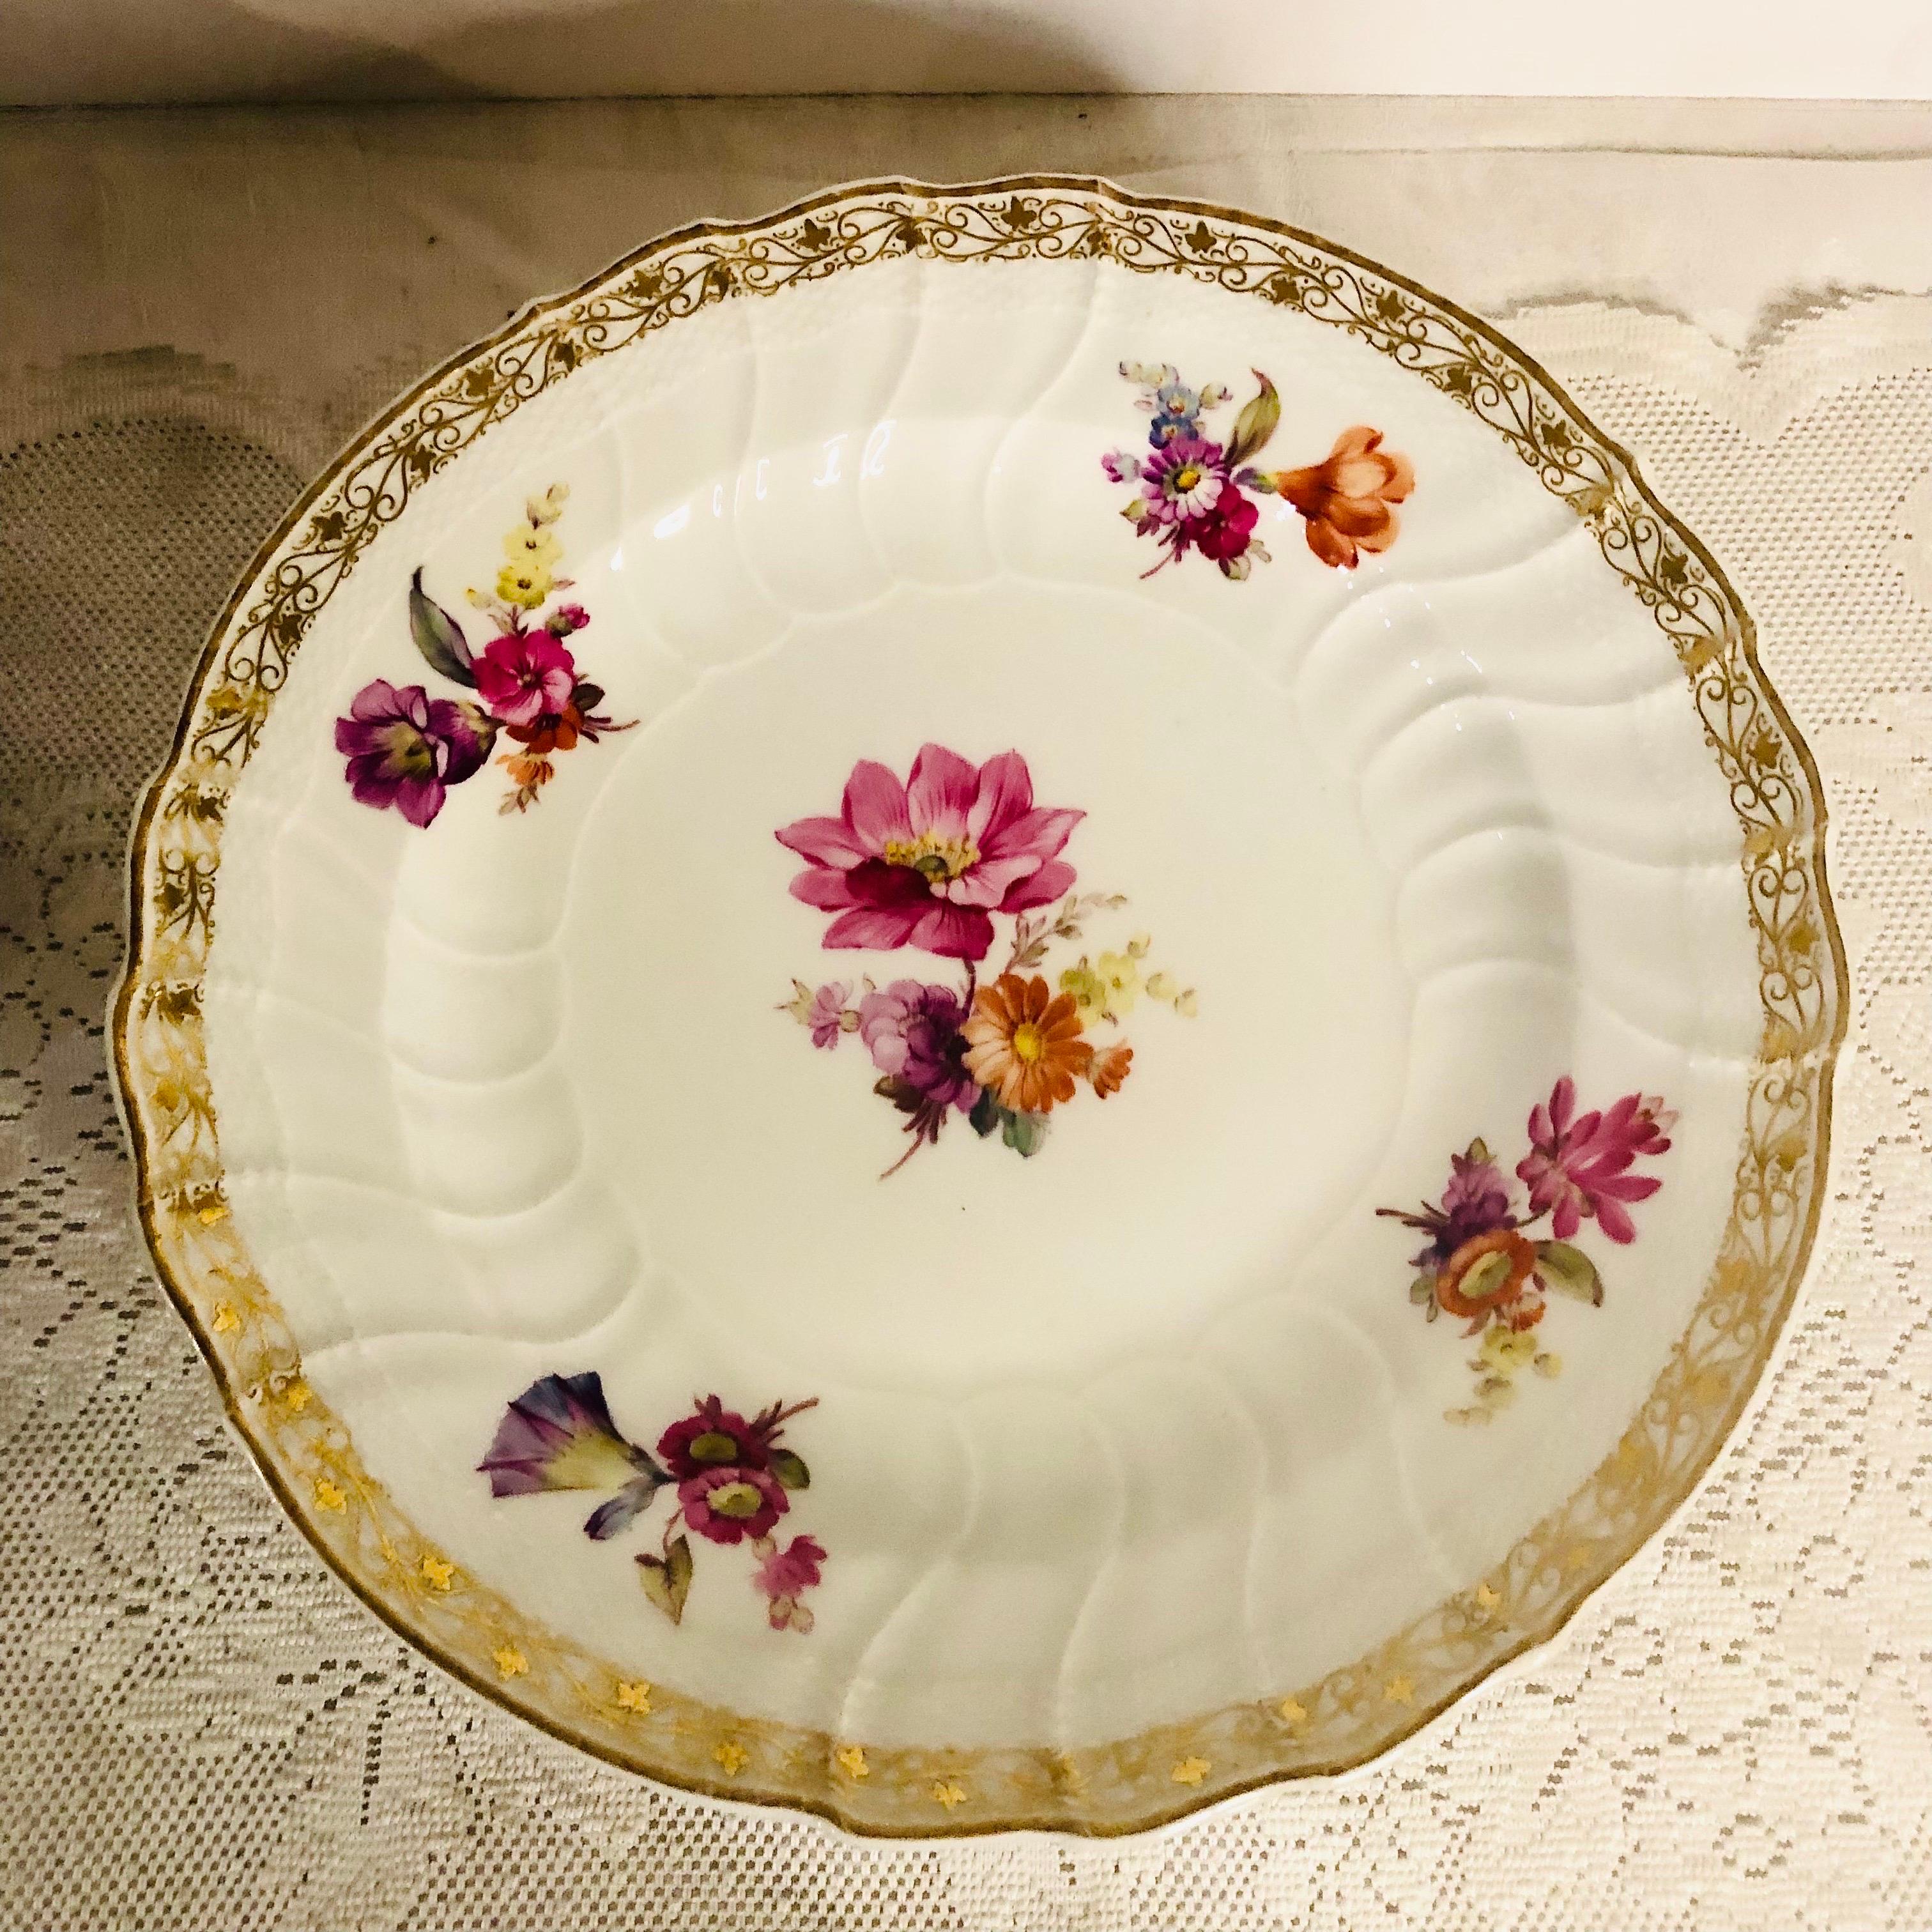 12 KPM Dinner Plates, Each Hand-Painted with a Different Central Flower Bouquet For Sale 5